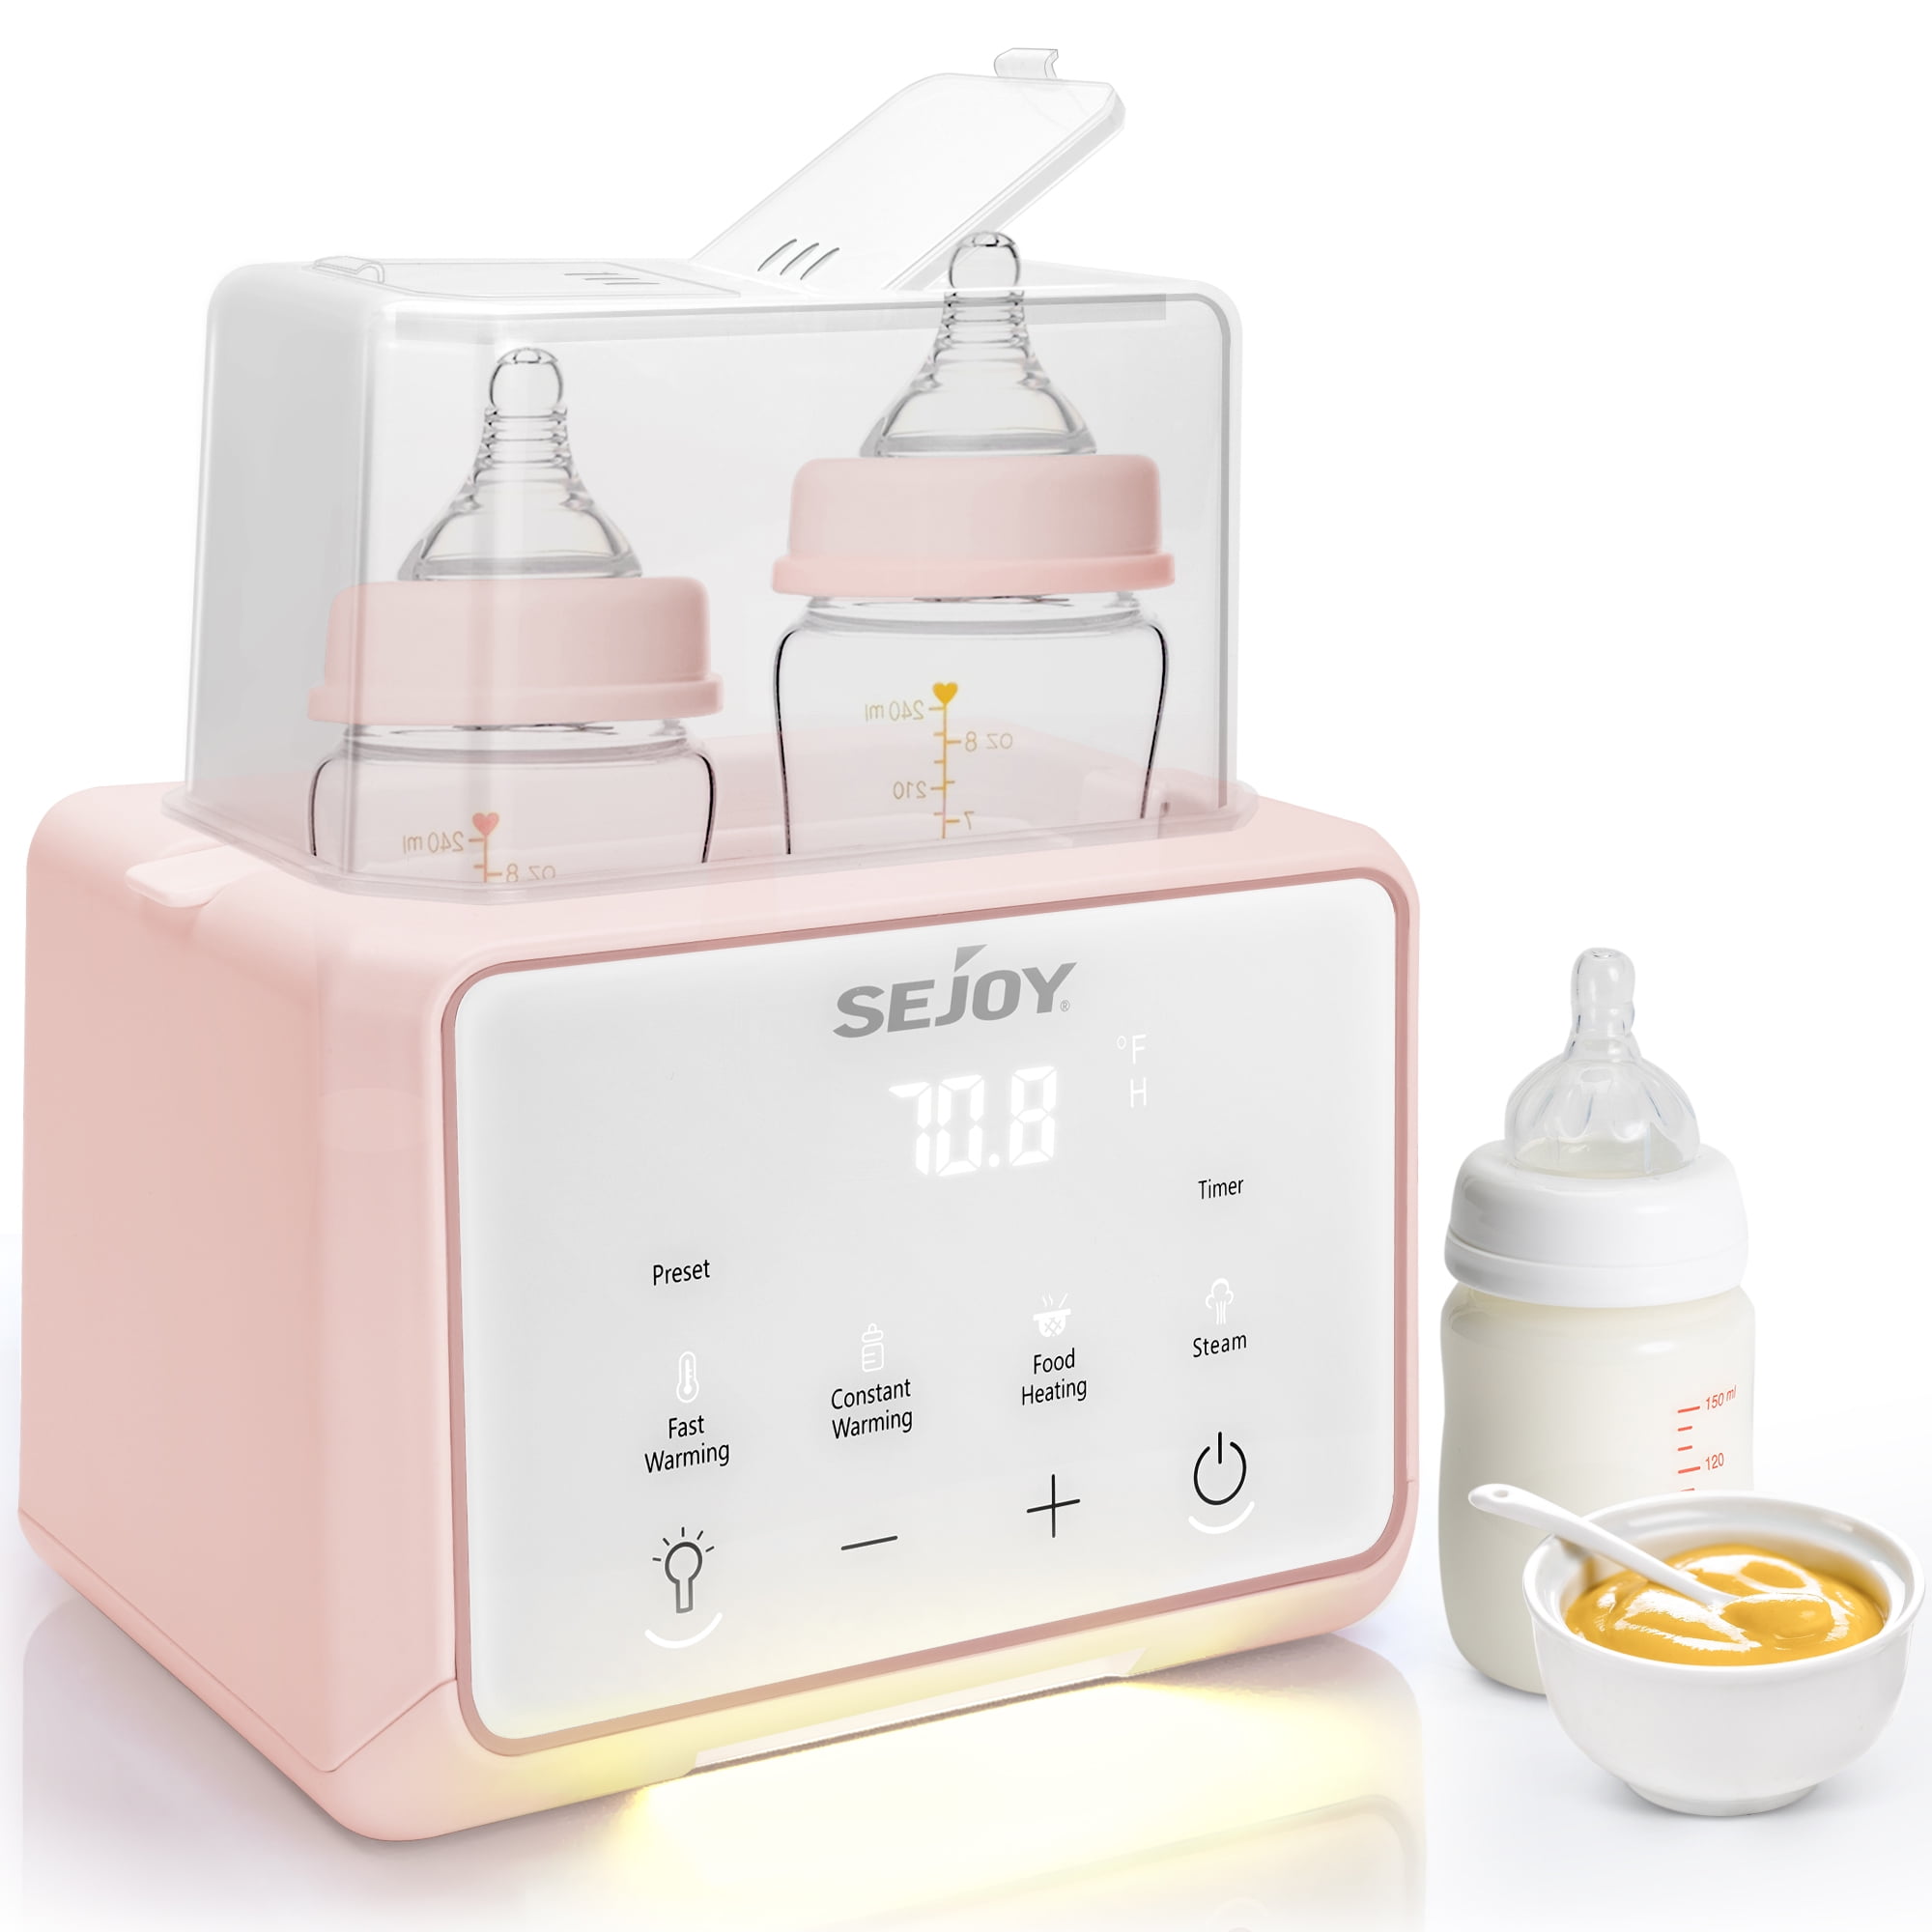 How to Use Momcozy 6 in 1 Fast Baby Bottle Warmer, milk, video recording